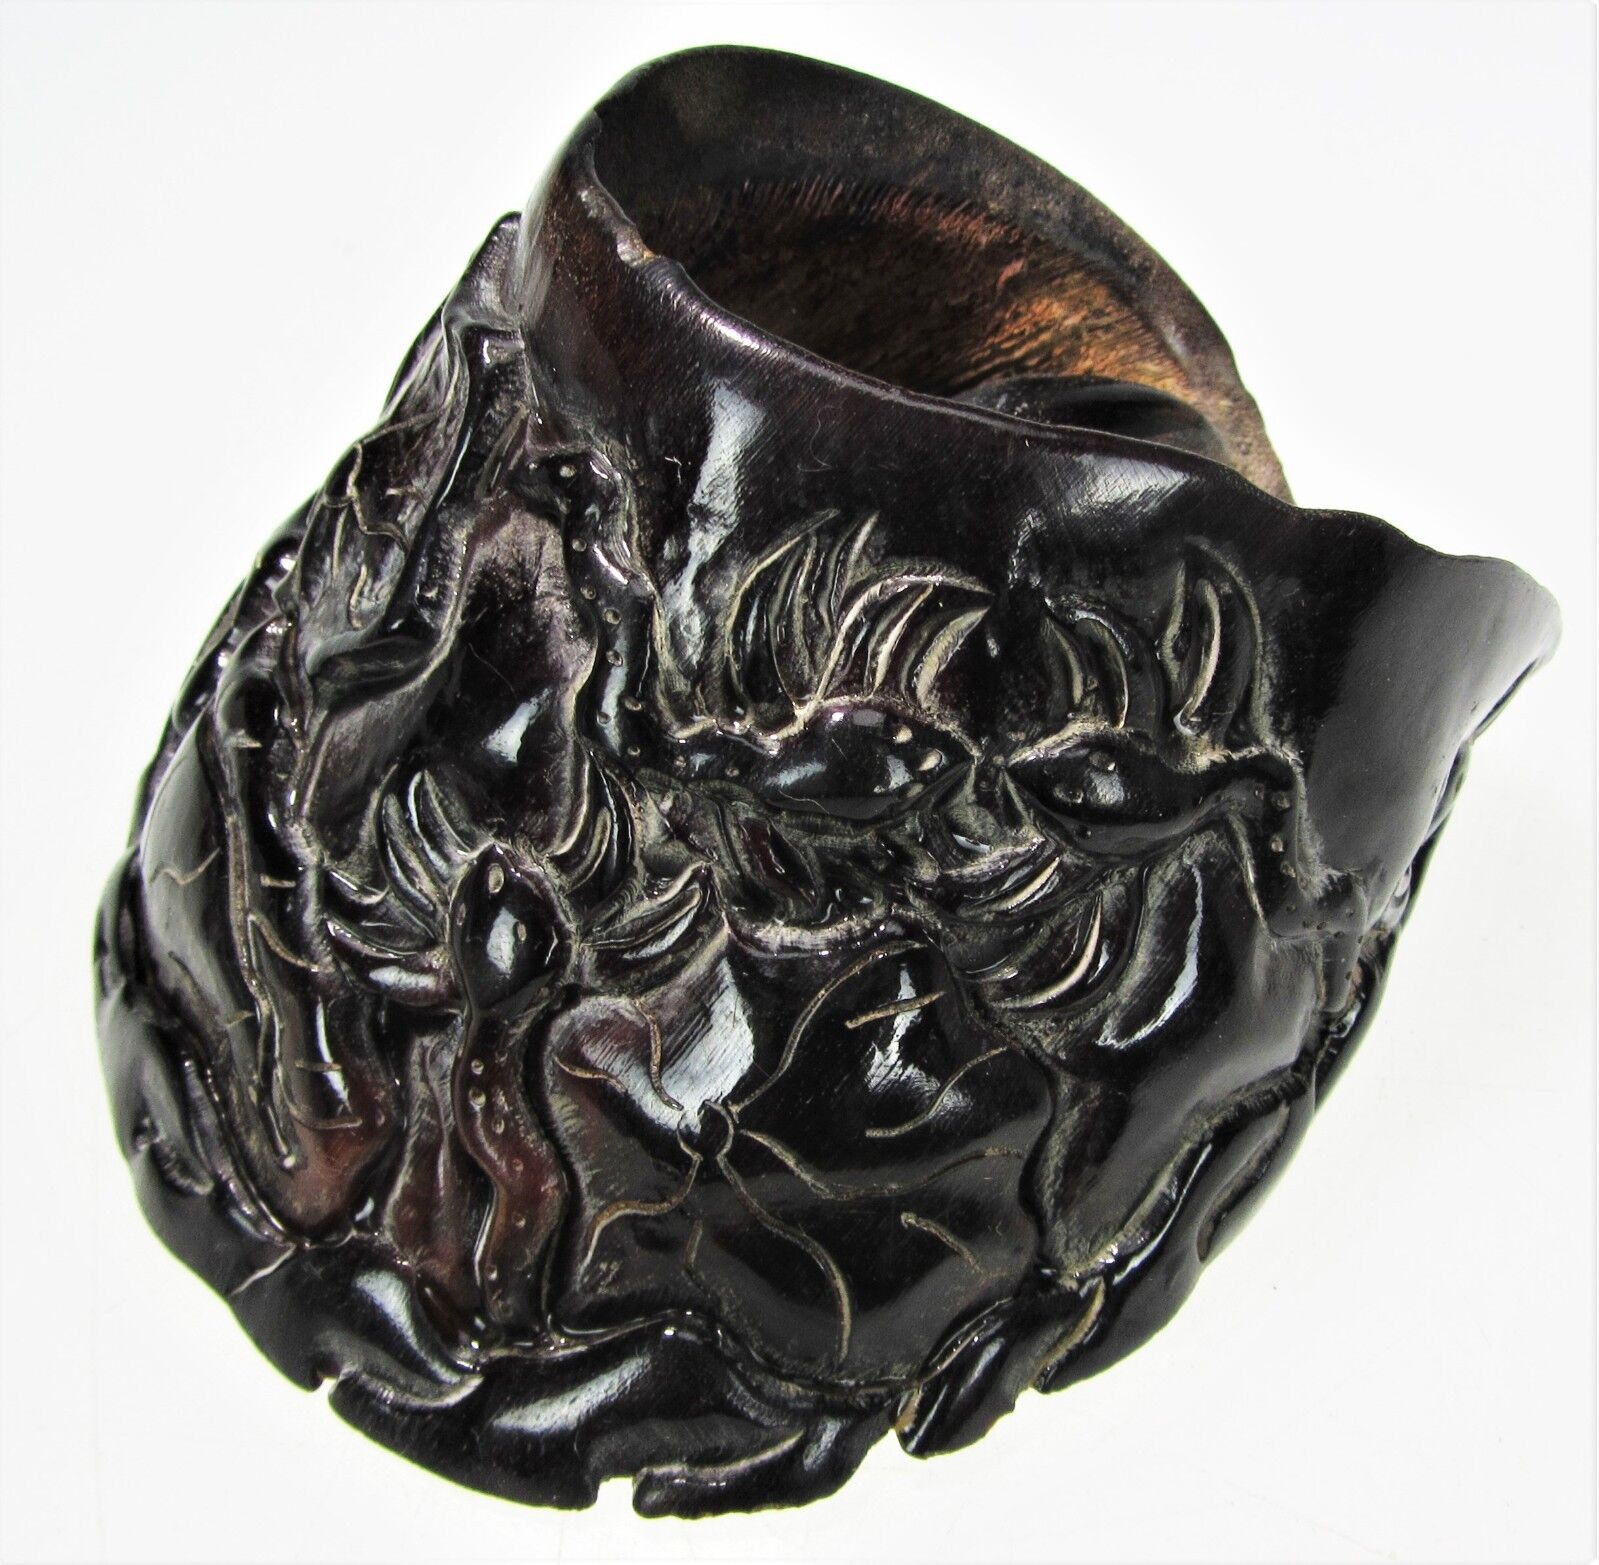 Hoof Oriental Tropical Carved Polished Snakes Garden Flowers Paper Weight Unique